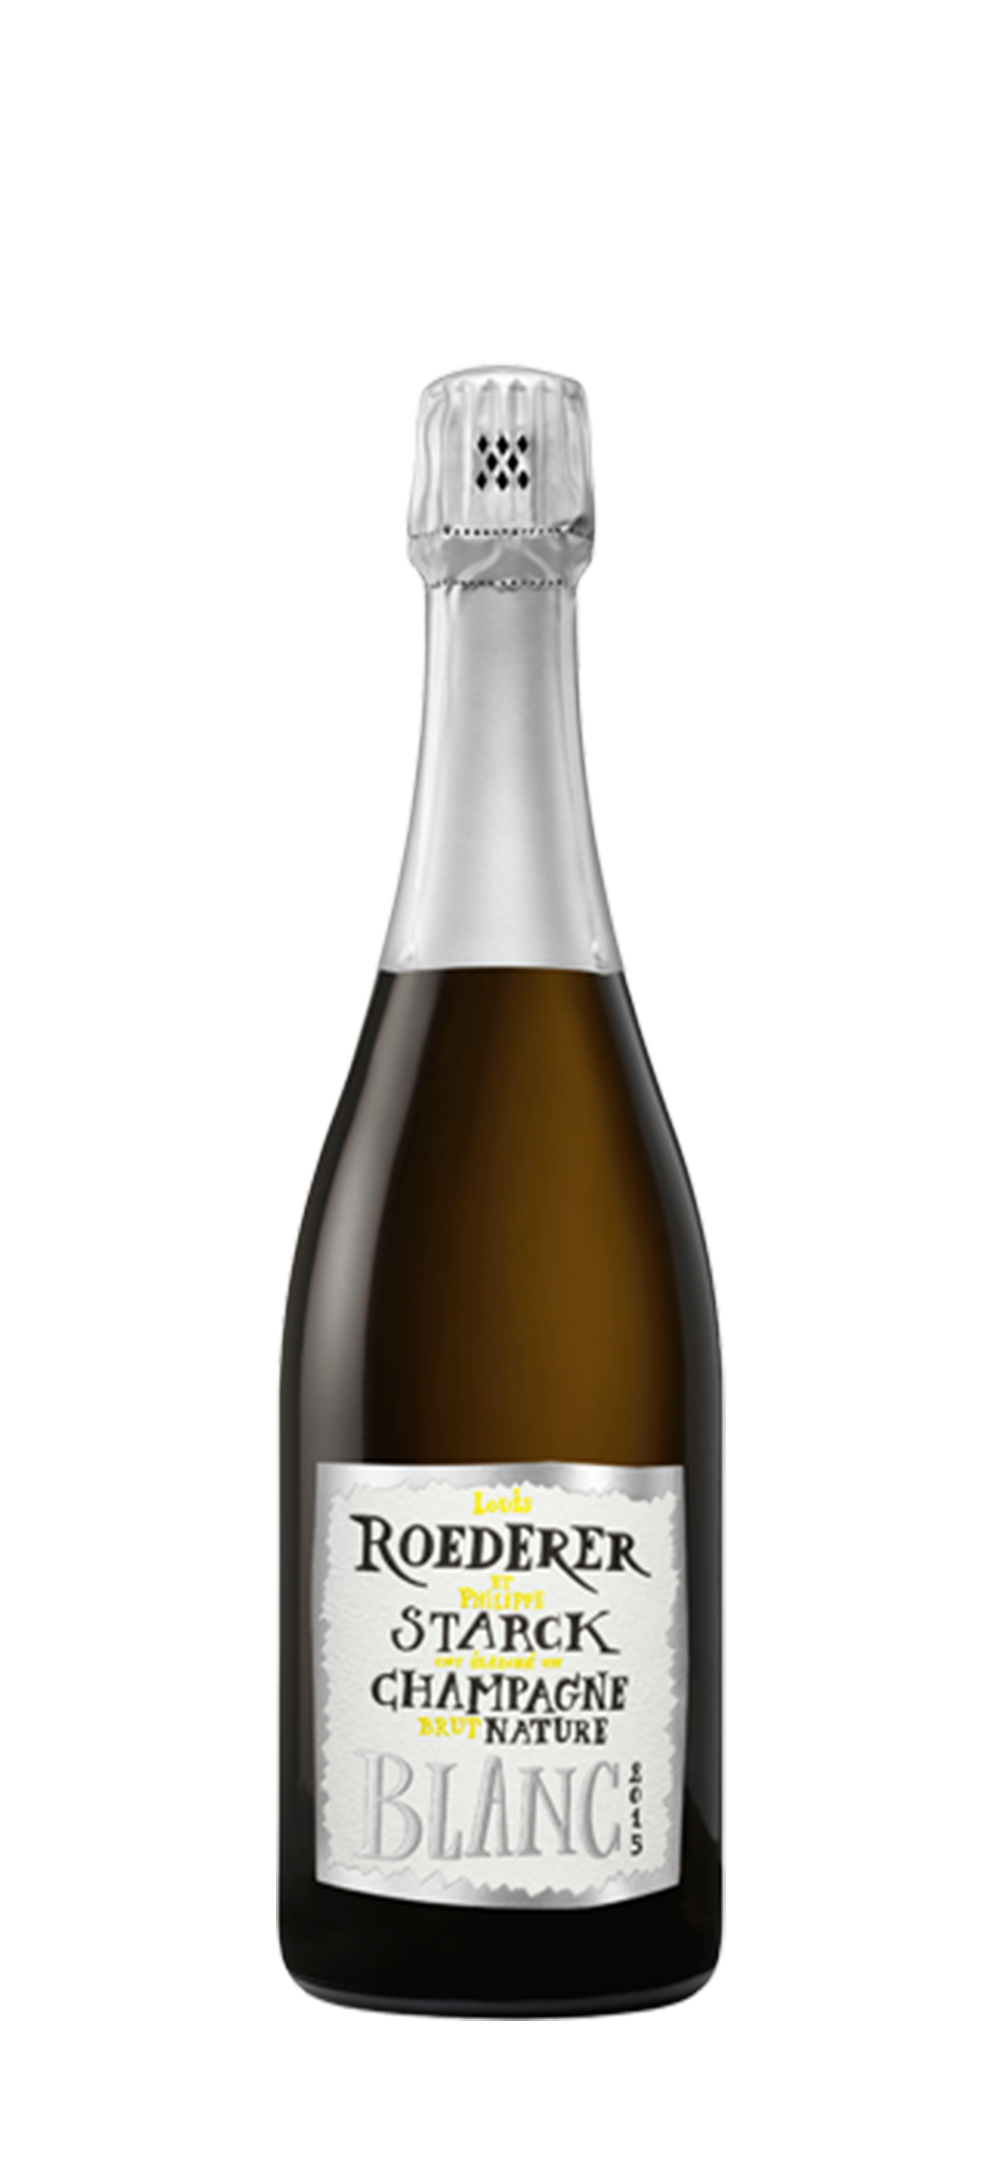 LOUIS ROEDERER BRUT NATURE – PHILIPPE STARCK 2015